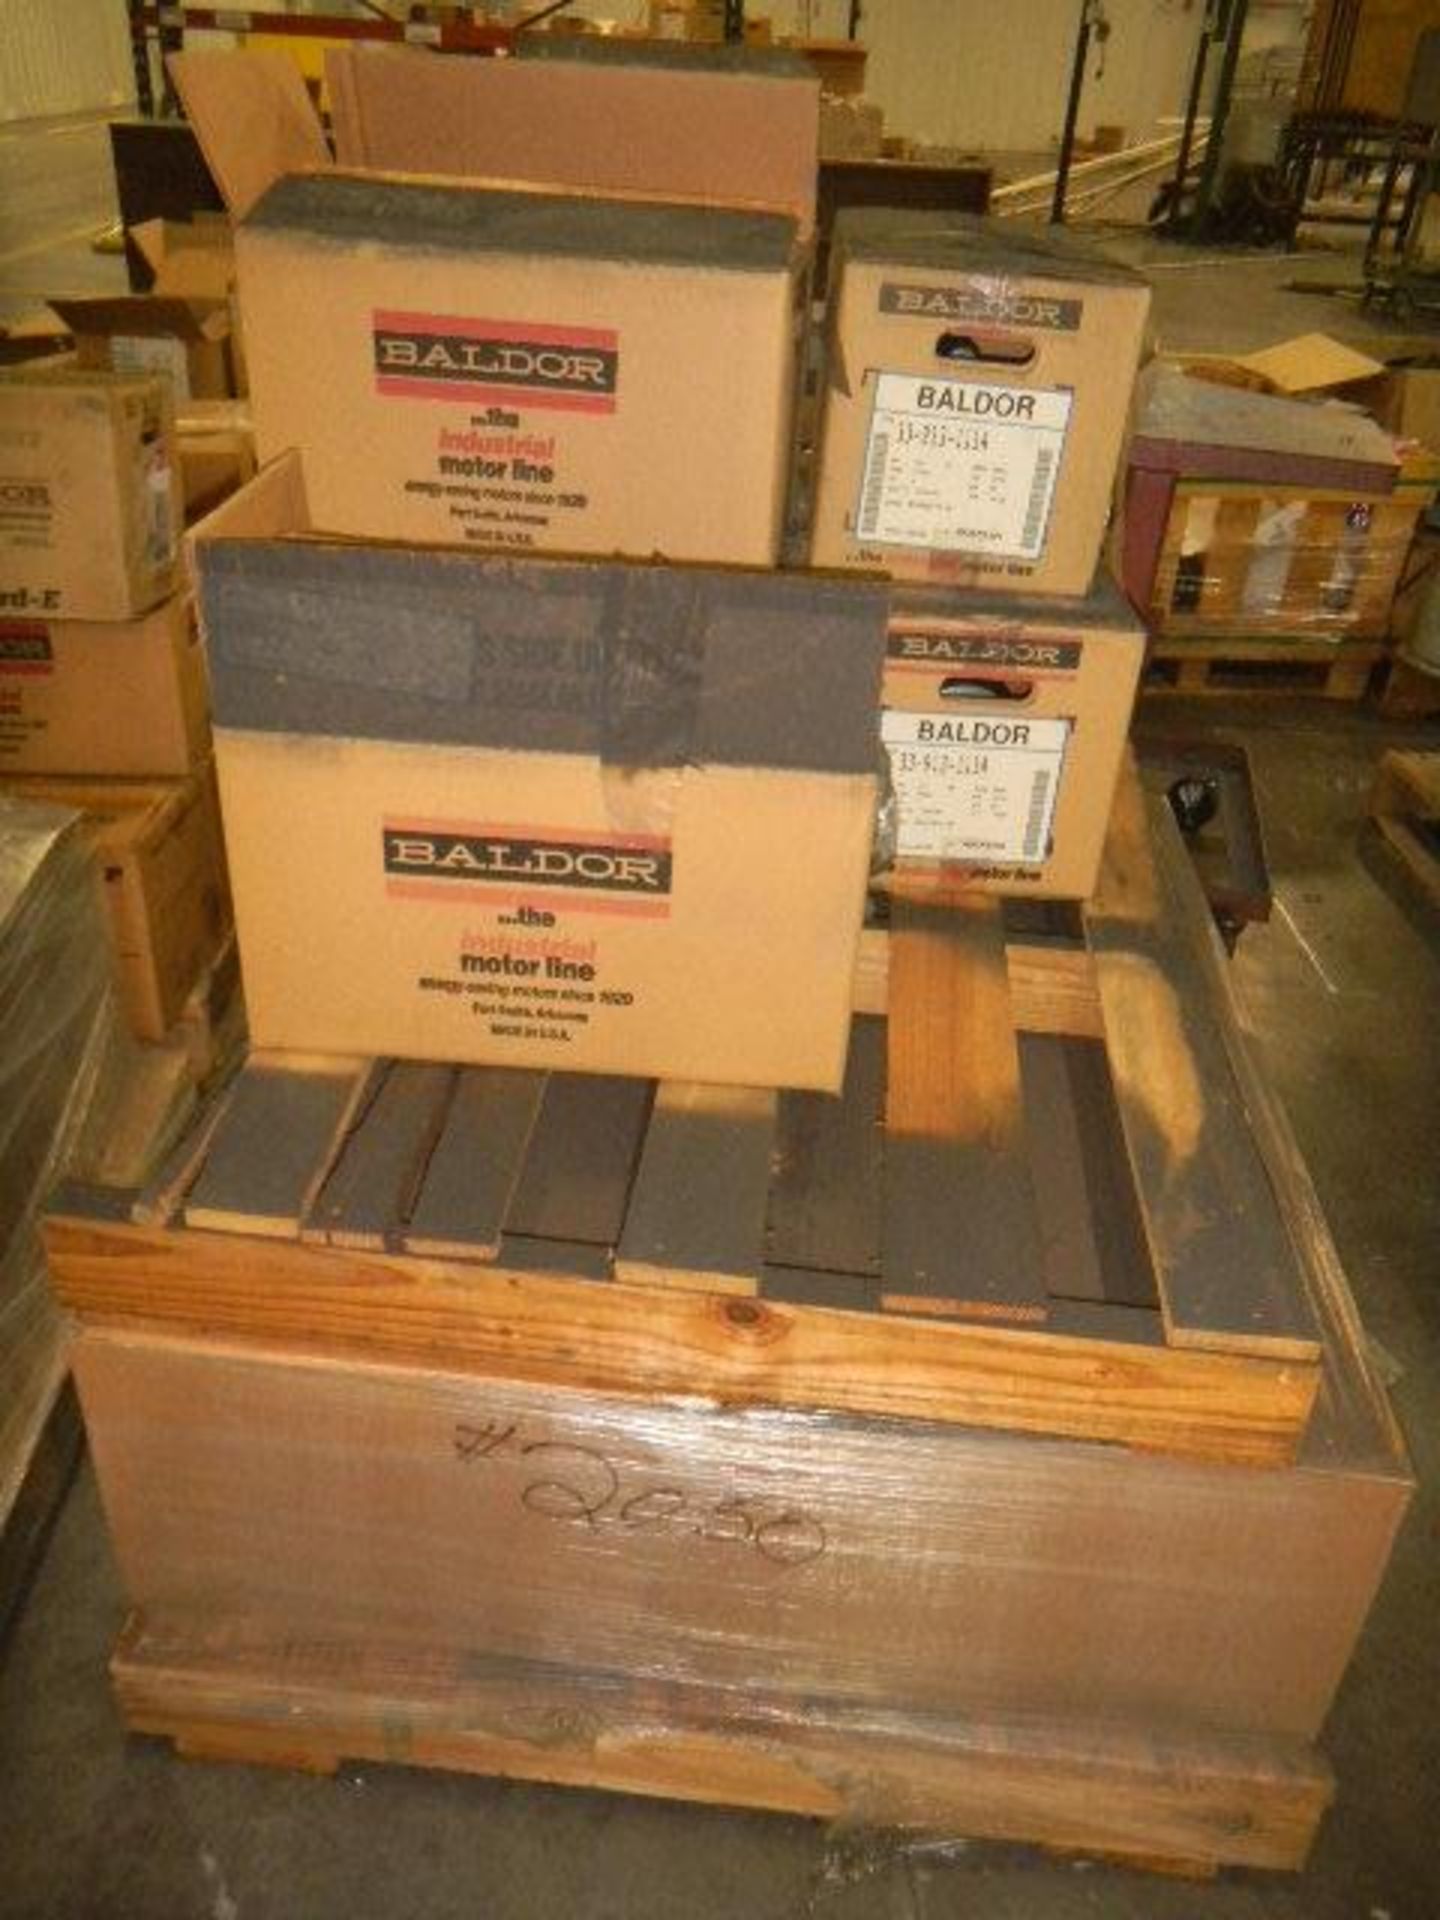 Baldor Electrical Motors - Misc. Models - New in Boxes - Sold ALL One Money